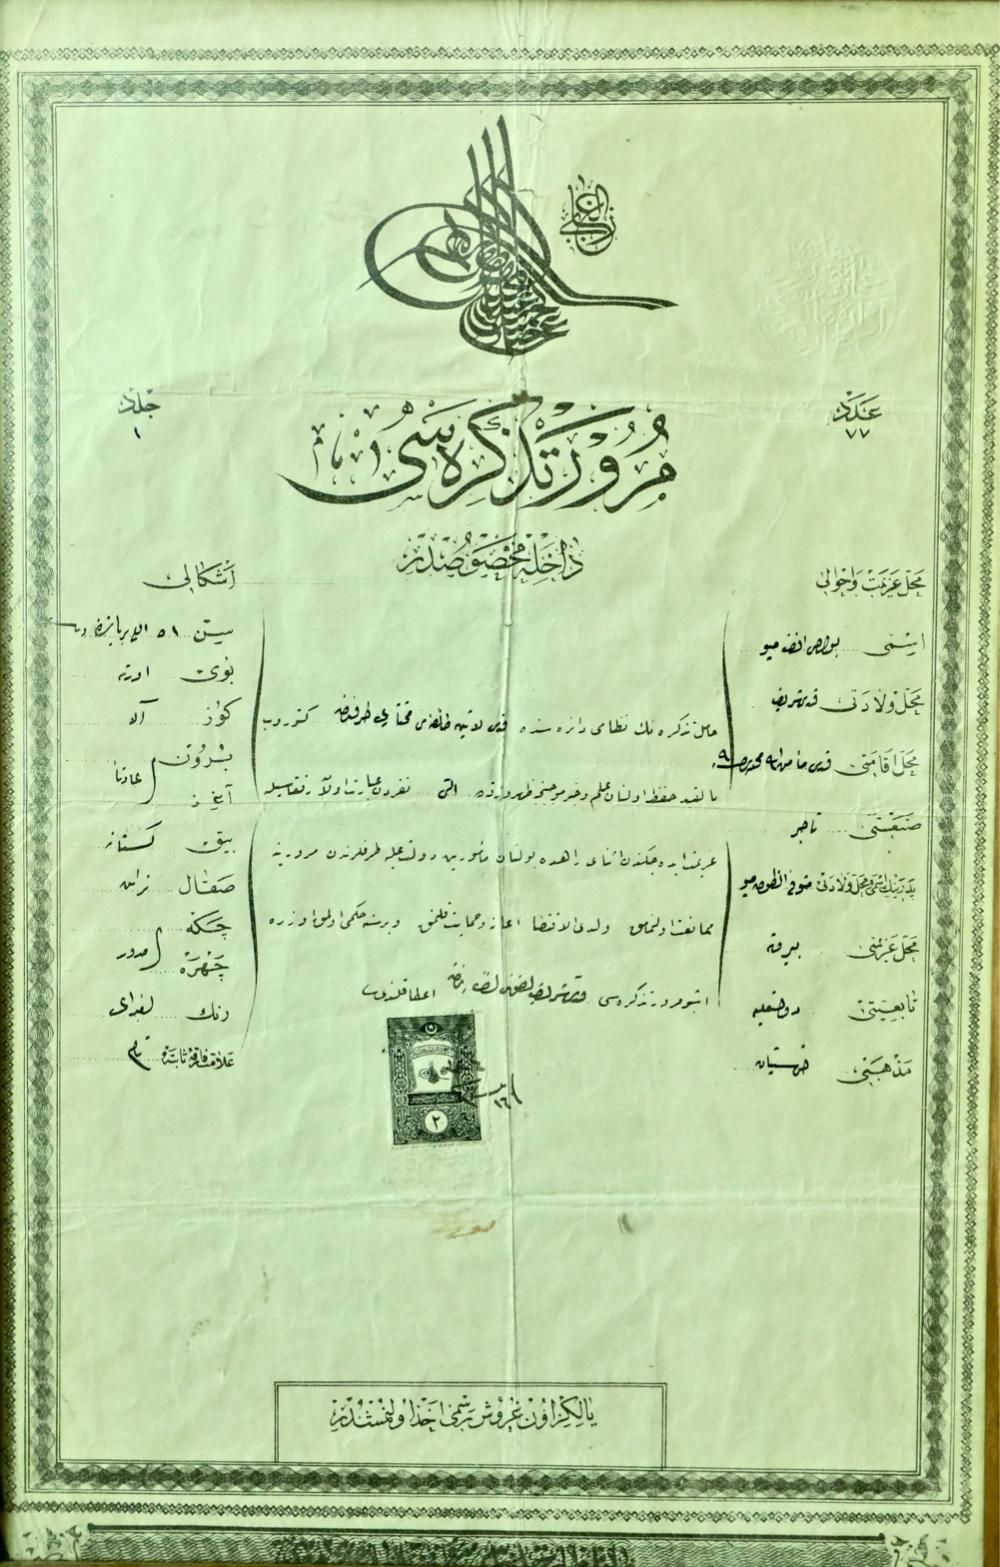 Ottoman travel document issued to Boulos Meo, 1800s